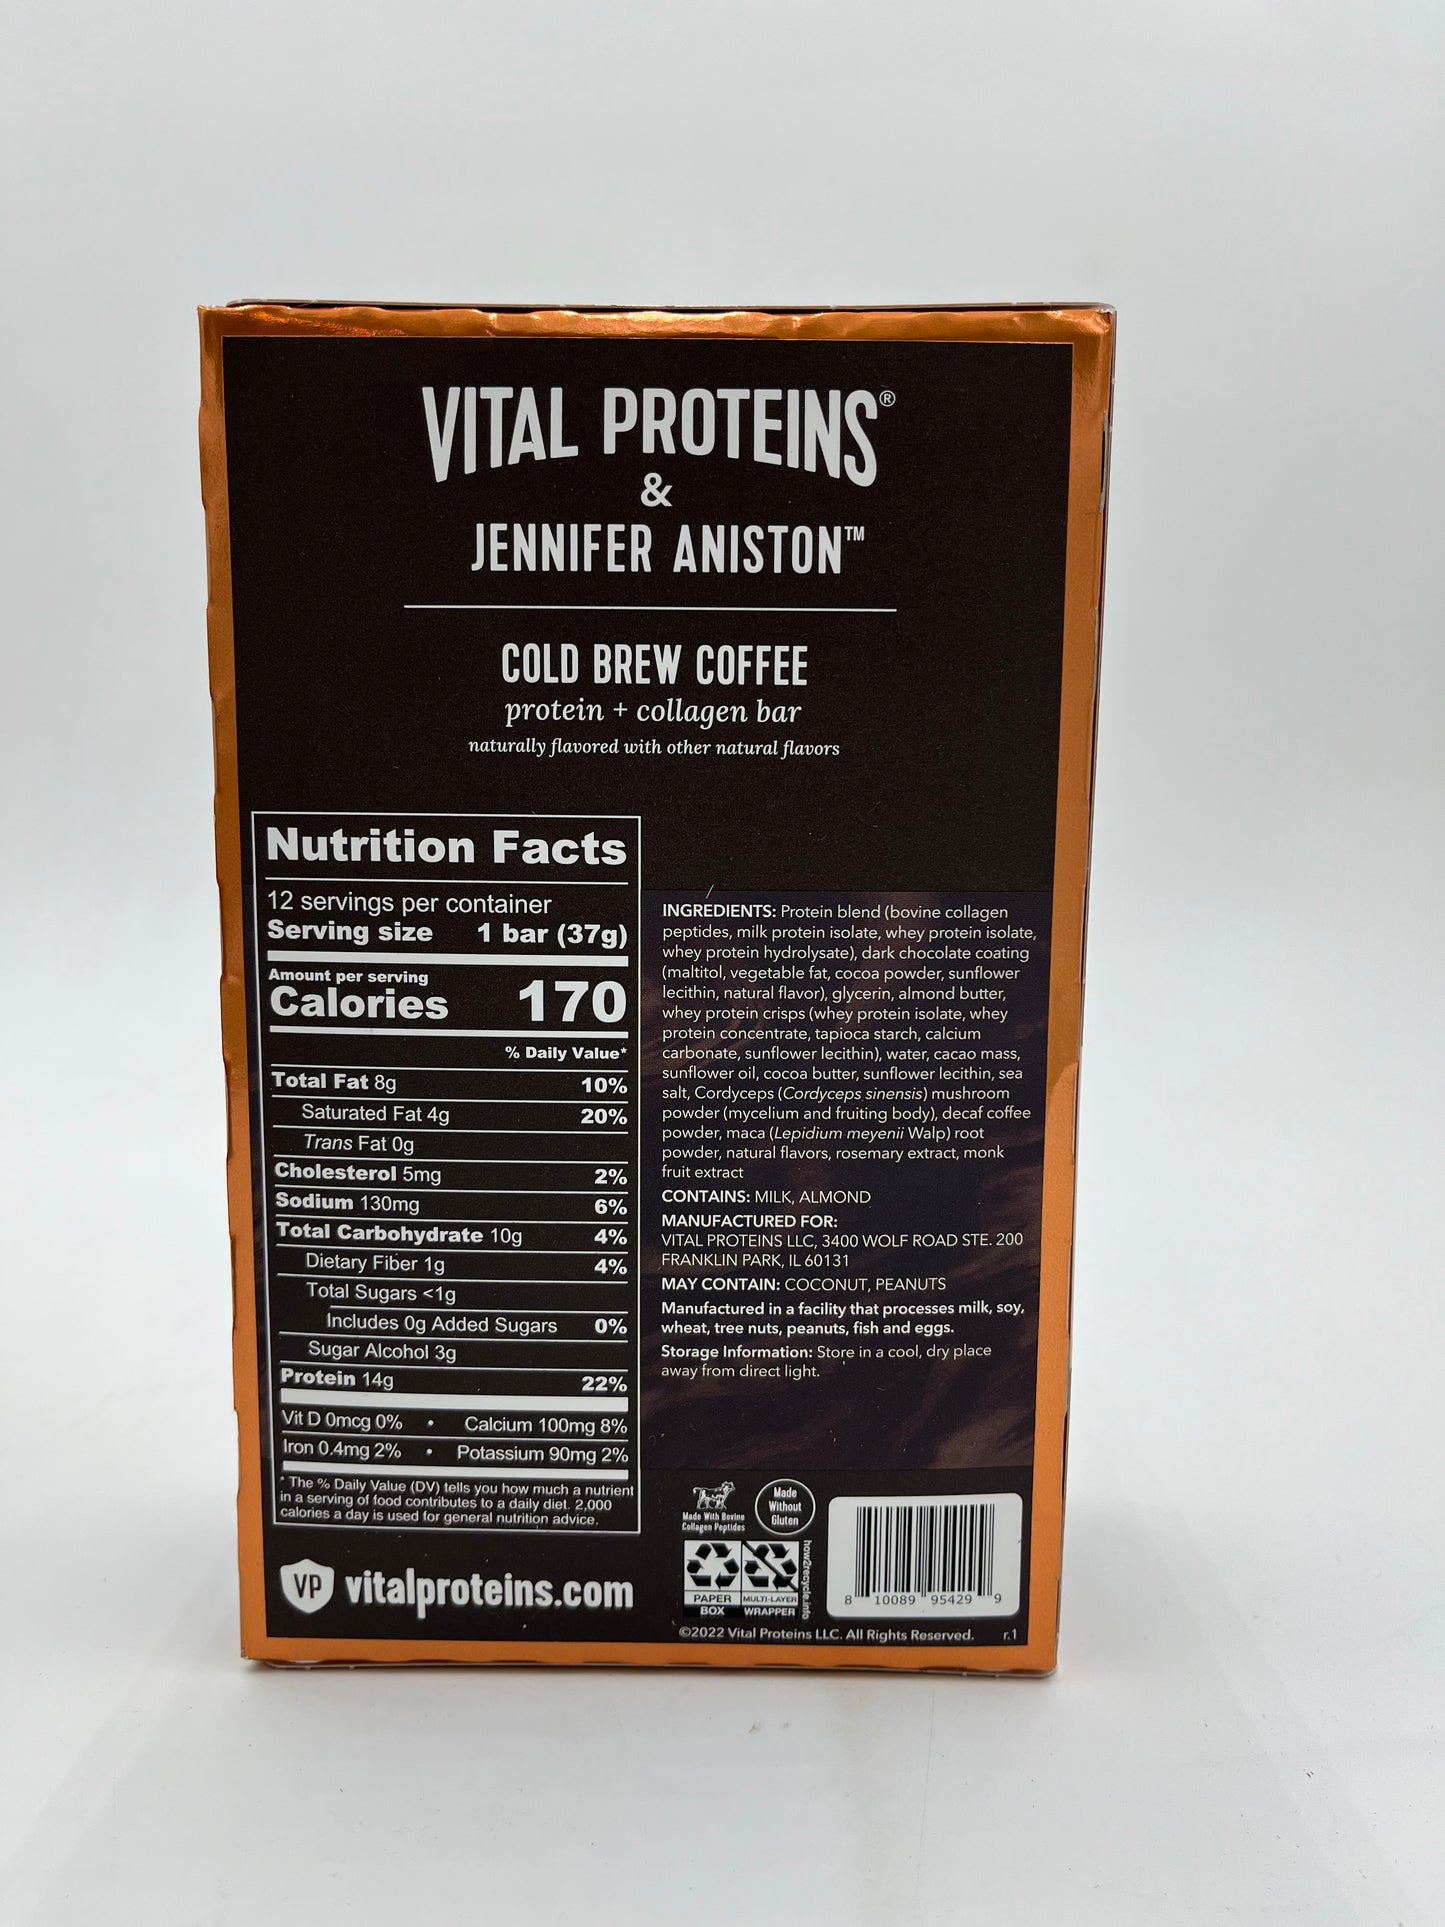 Vital Proteins & Jennifer Aniston- Cold Brew Coffee Protein Bar- Box of 12 bars- Case of 4 boxes